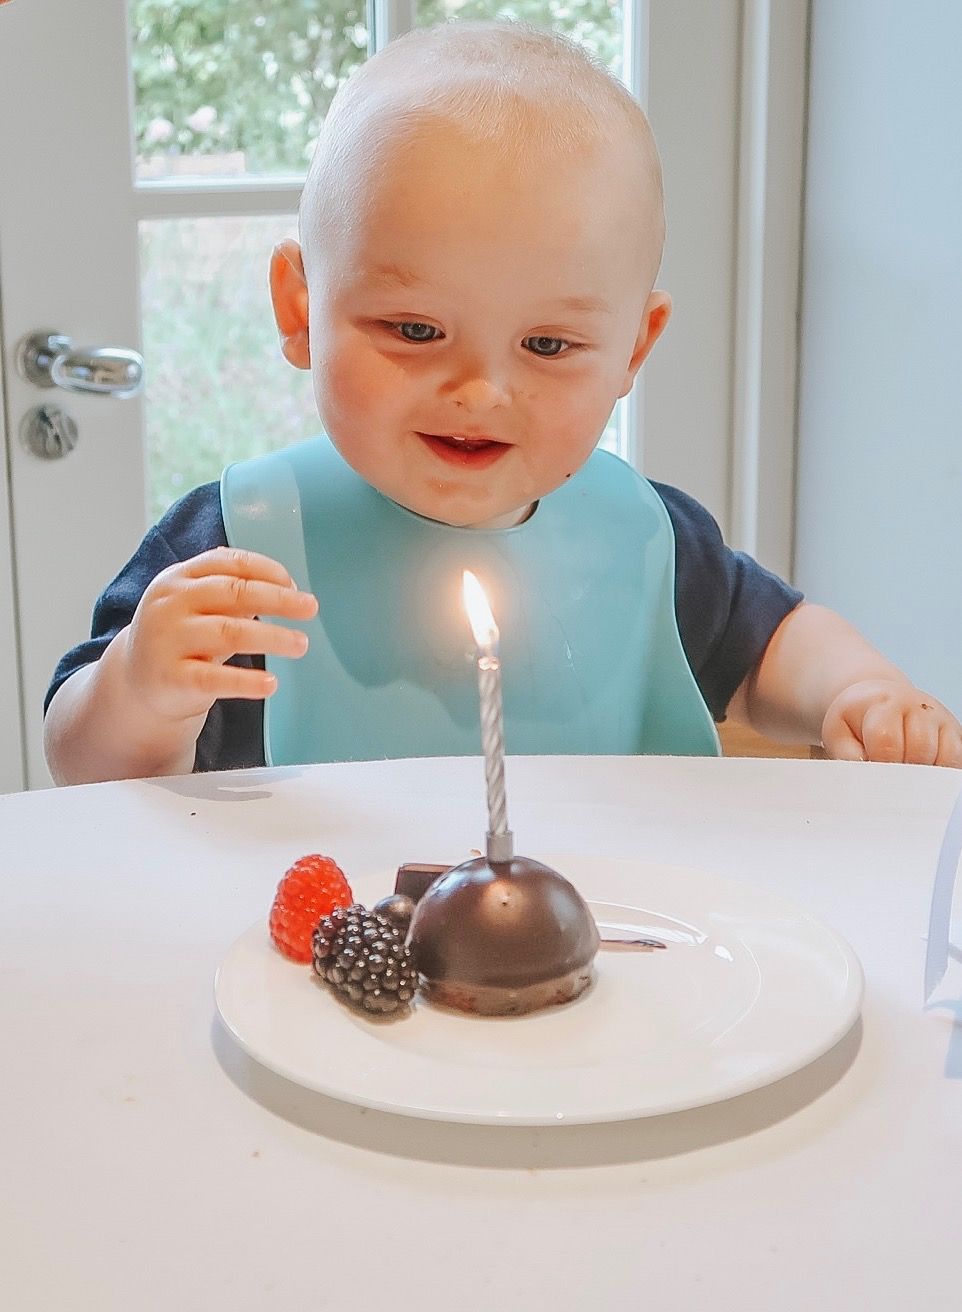 His first birthday - happy memories 